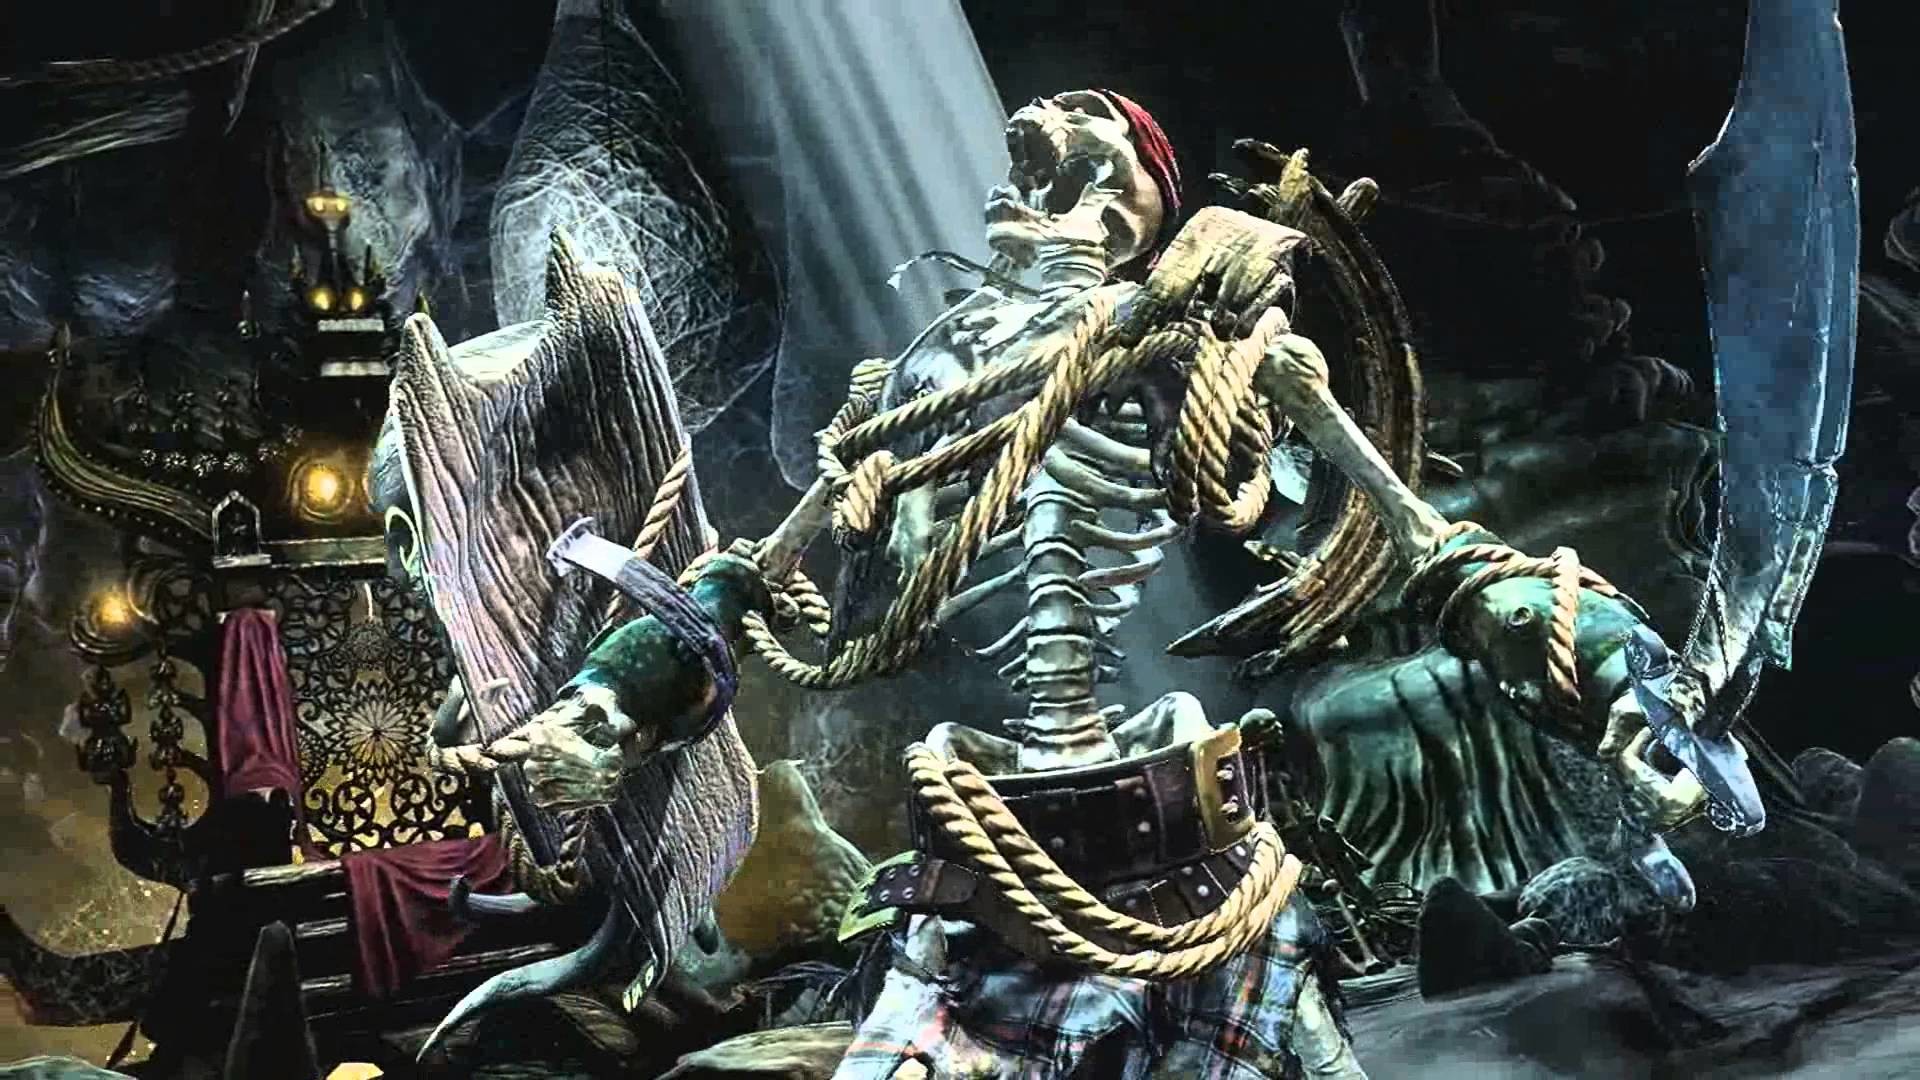 1920x1080 Killer Instinct: Xbox one. (Spinal) 80 hit combo, 3 wins on a row. W.  Commentary.